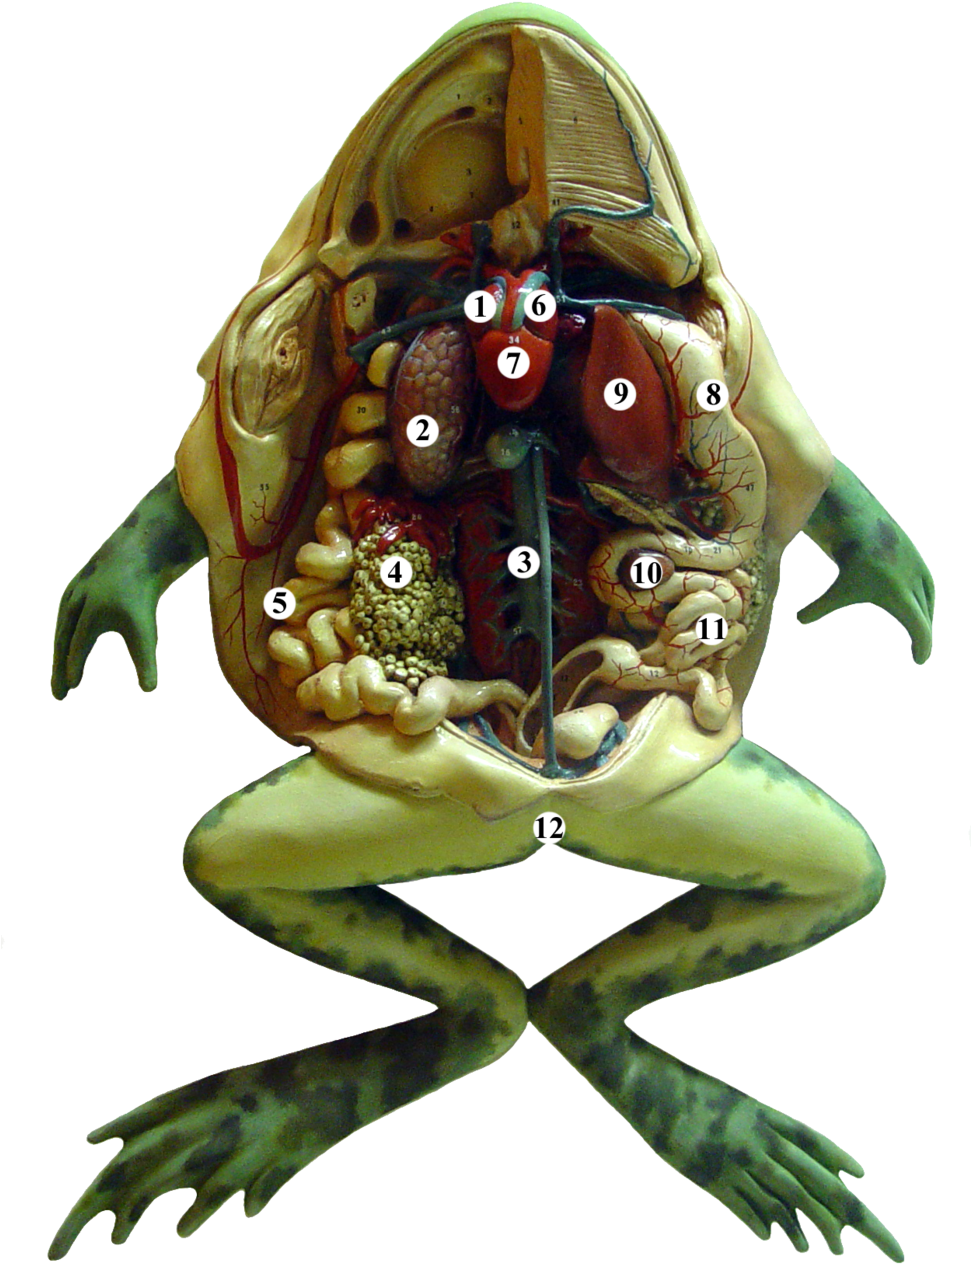 Dissection Of Frog Digestive System Lovely Frog Howling - Anatomy Of A Frog (970x1296)